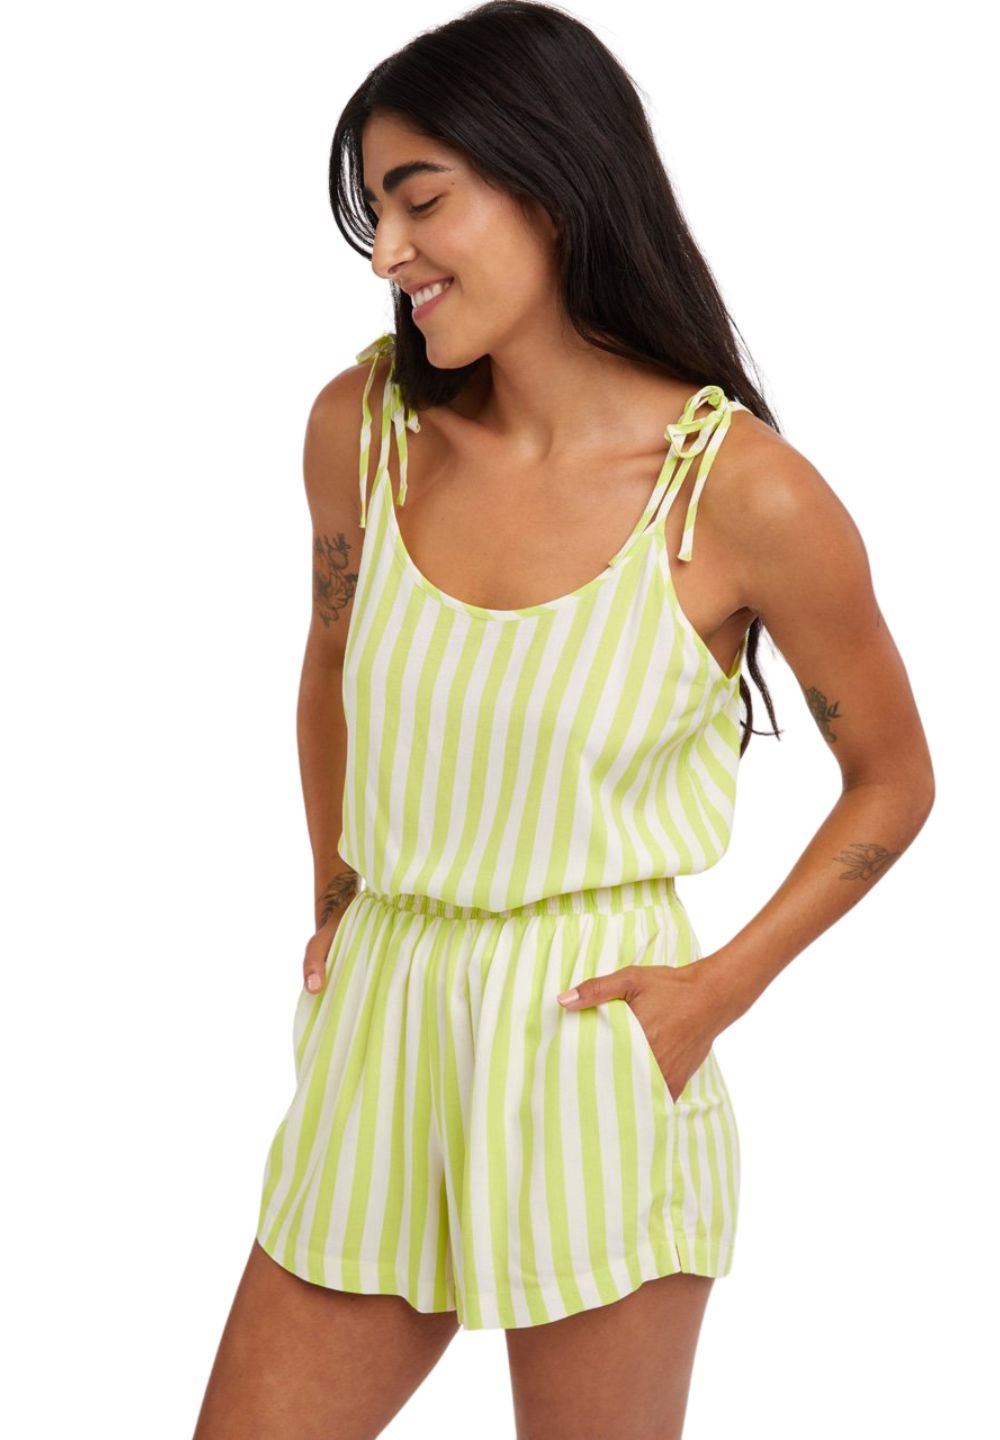 Ban.do Green and White Stripe Tank and Cami Set, Size 2X